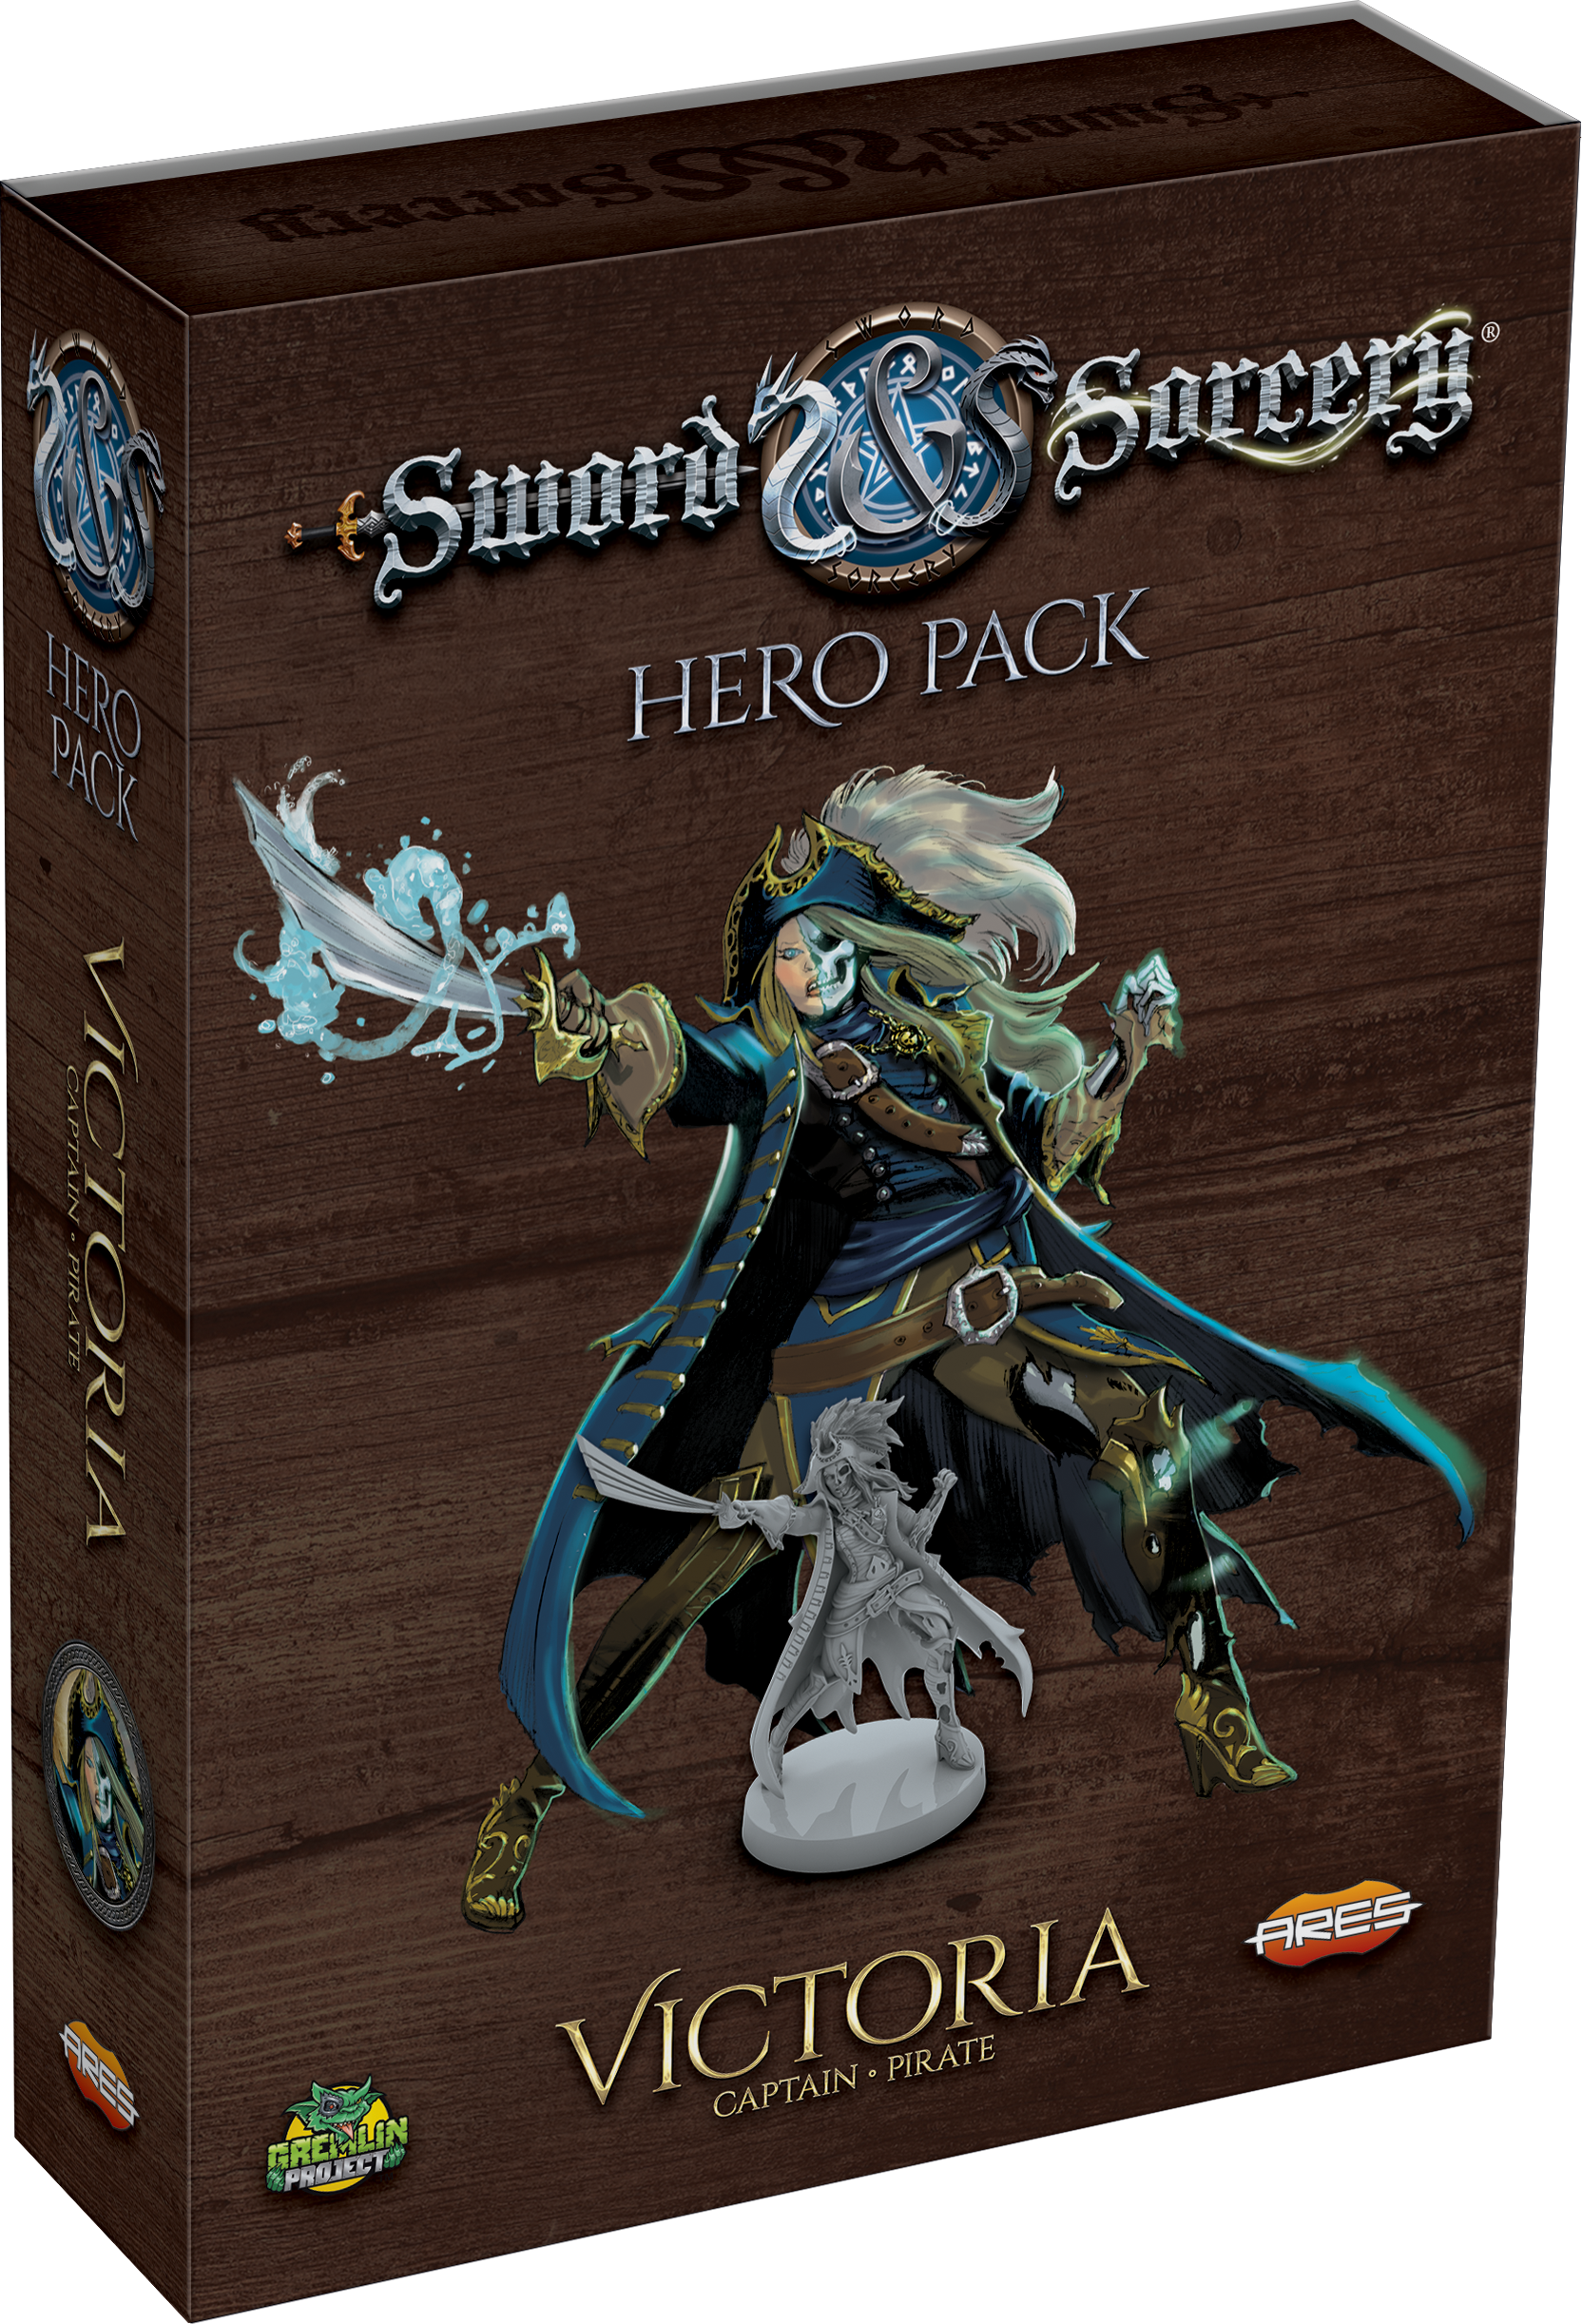 Sword & Sorcery: Hero Pack - Victoria the Captain/Pirate